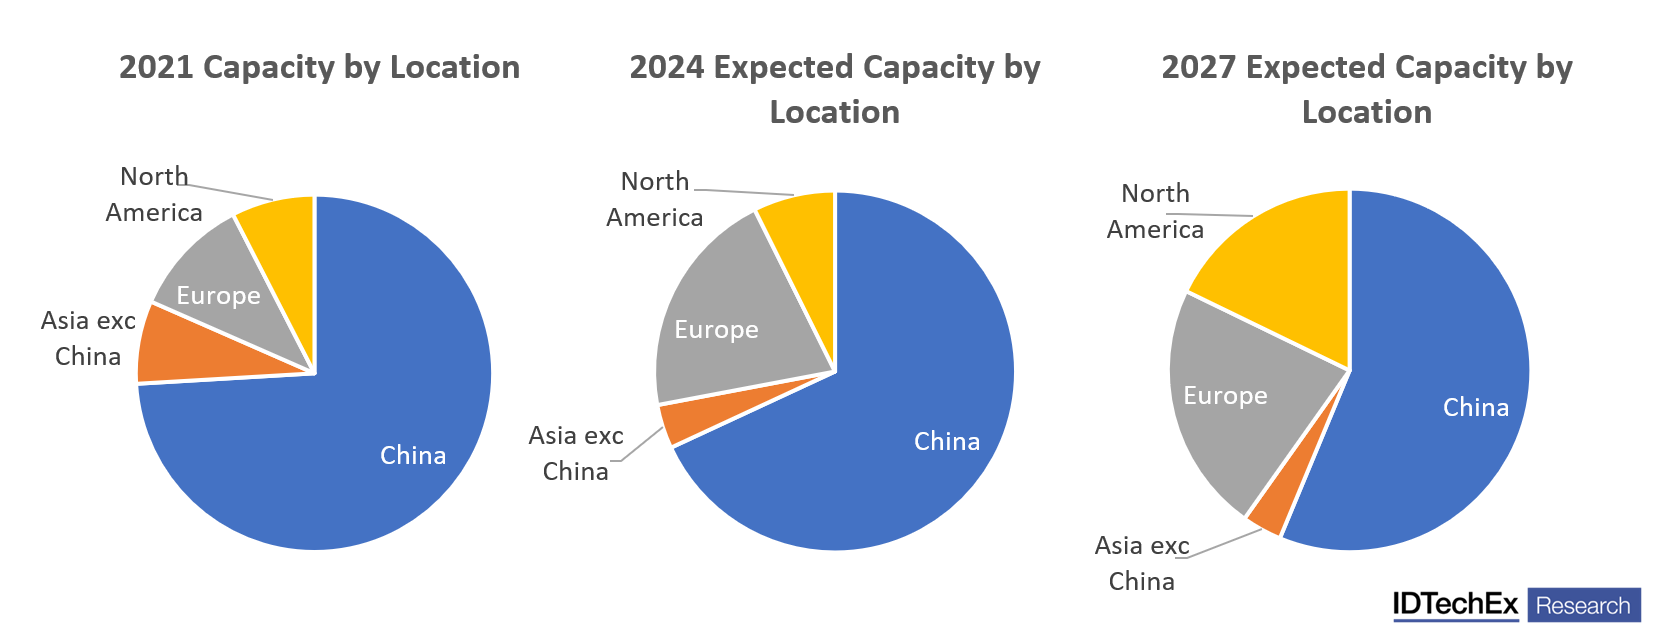 Capacity by location. Source: IDTechEx – “Li-ion Battery Market 2023-2033: Technologies, Players, Applications, Outlooks and Forecasts”